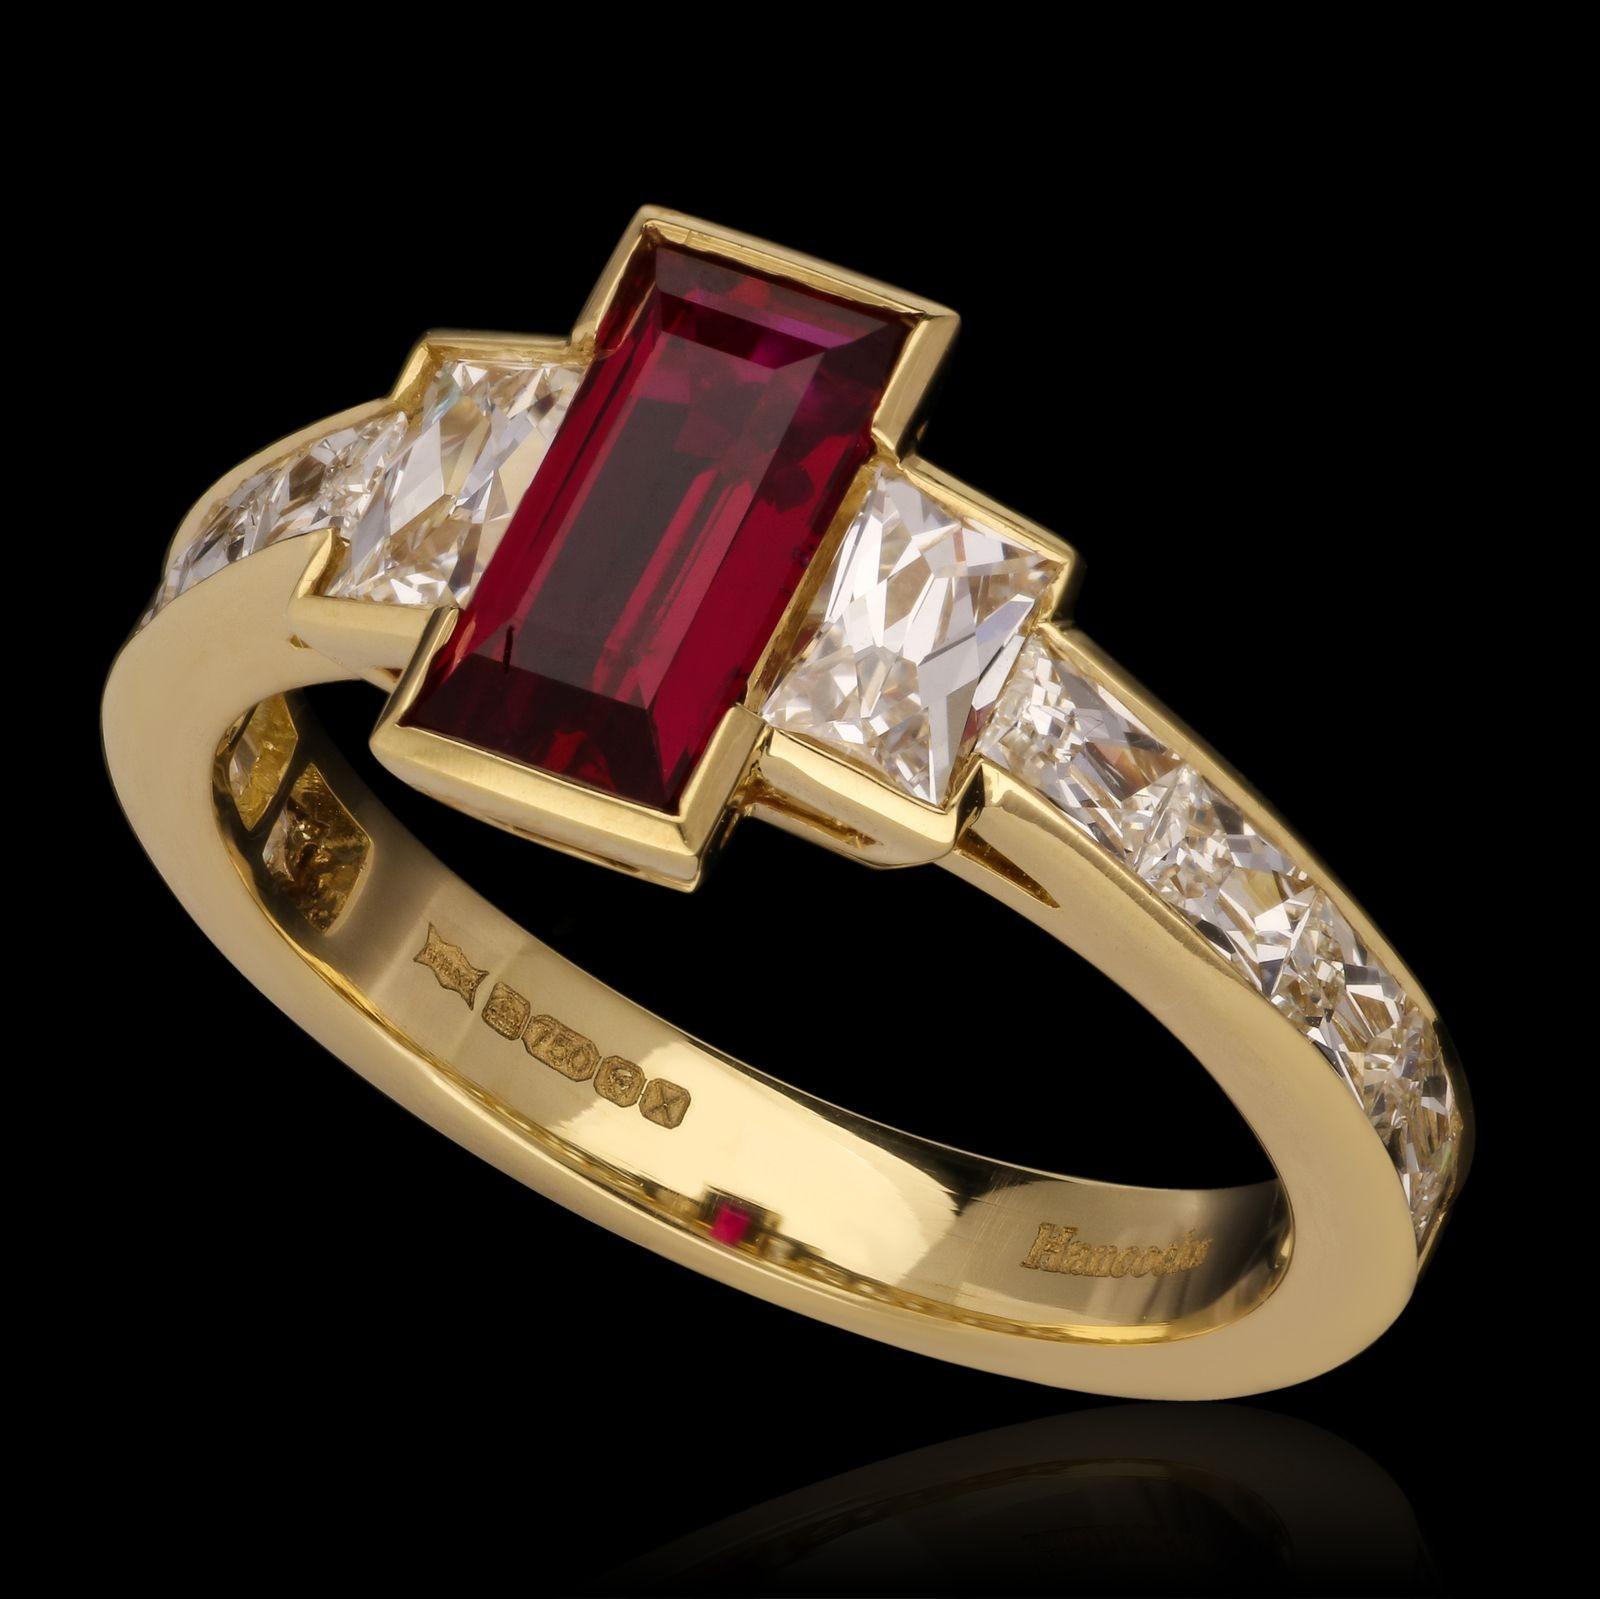 An incredible antique baguette cut Burmese Ruby with no treatment set in an 18ct yellow gold ring with stunning top white French cut diamonds in a channel setting.

Maker
Hancocks

Period
Contemporary

Origin
London

Gemstones
1.10ct Rectangular